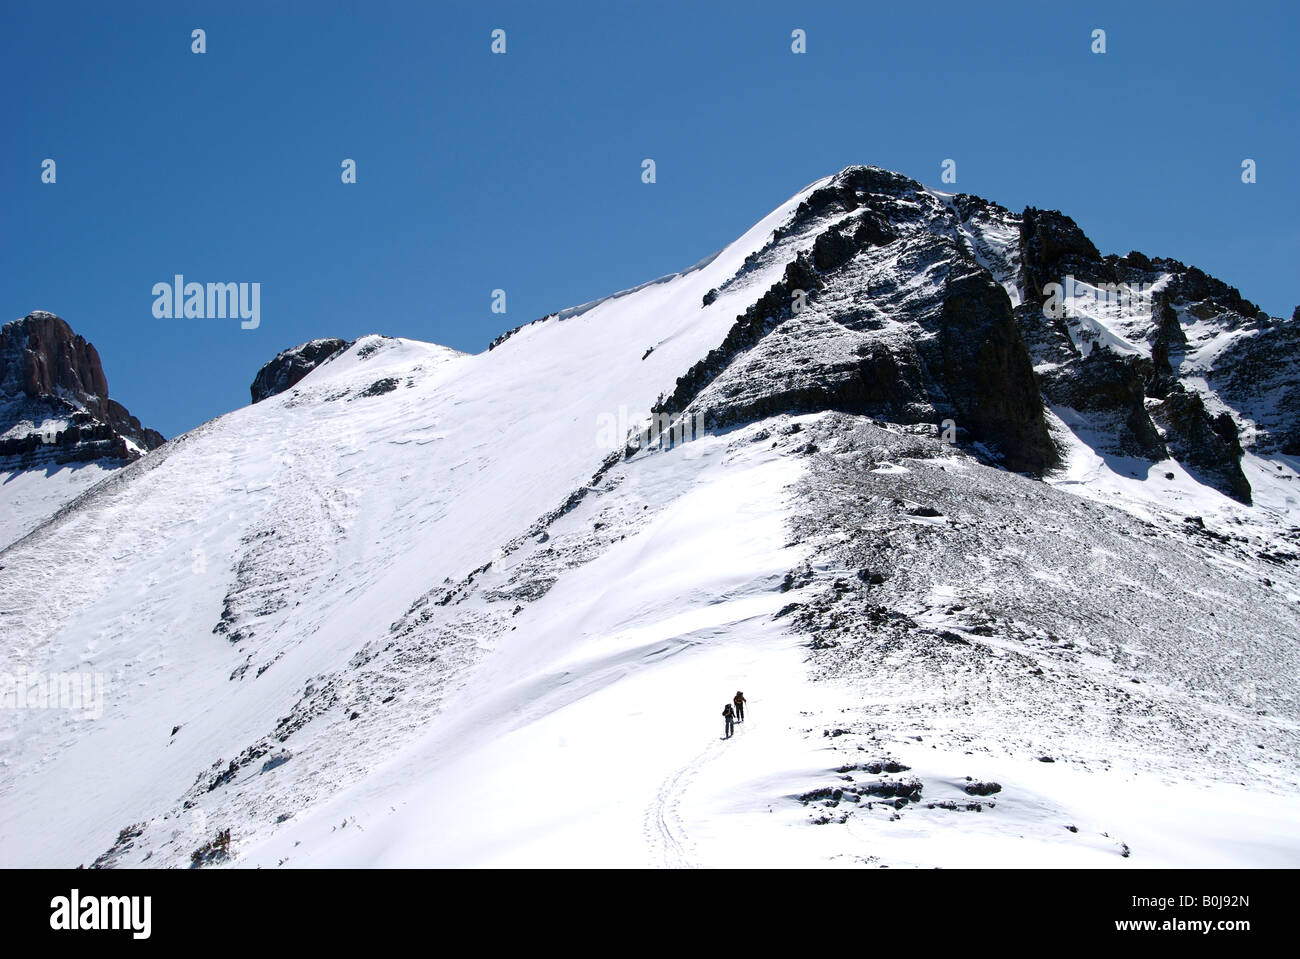 two backcountry skiers climb a mountain to ski down it high up in the San Juan mountains, Colorado. Stock Photo